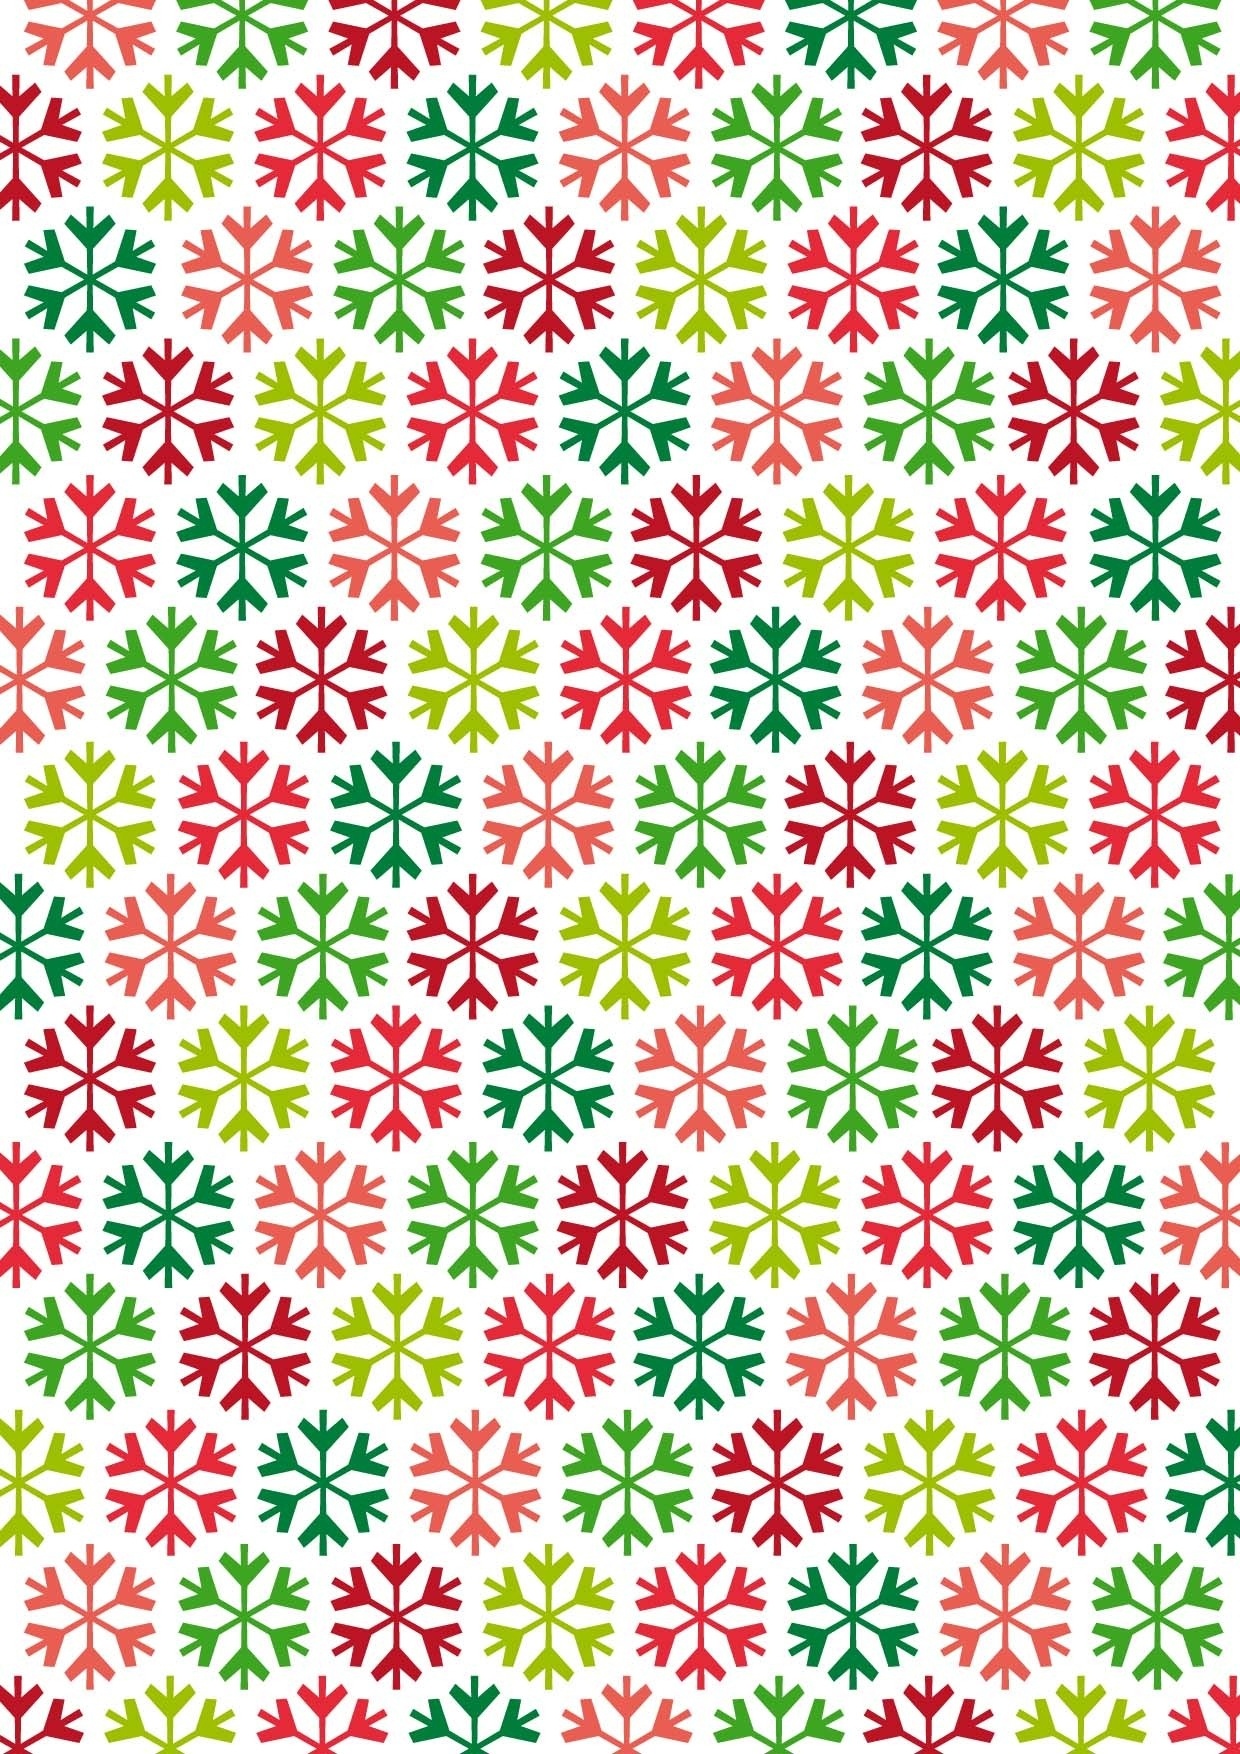 Free Printable Christmas Paper (90+ Images In Collection) Page 1 - Free Printable Christmas Paper